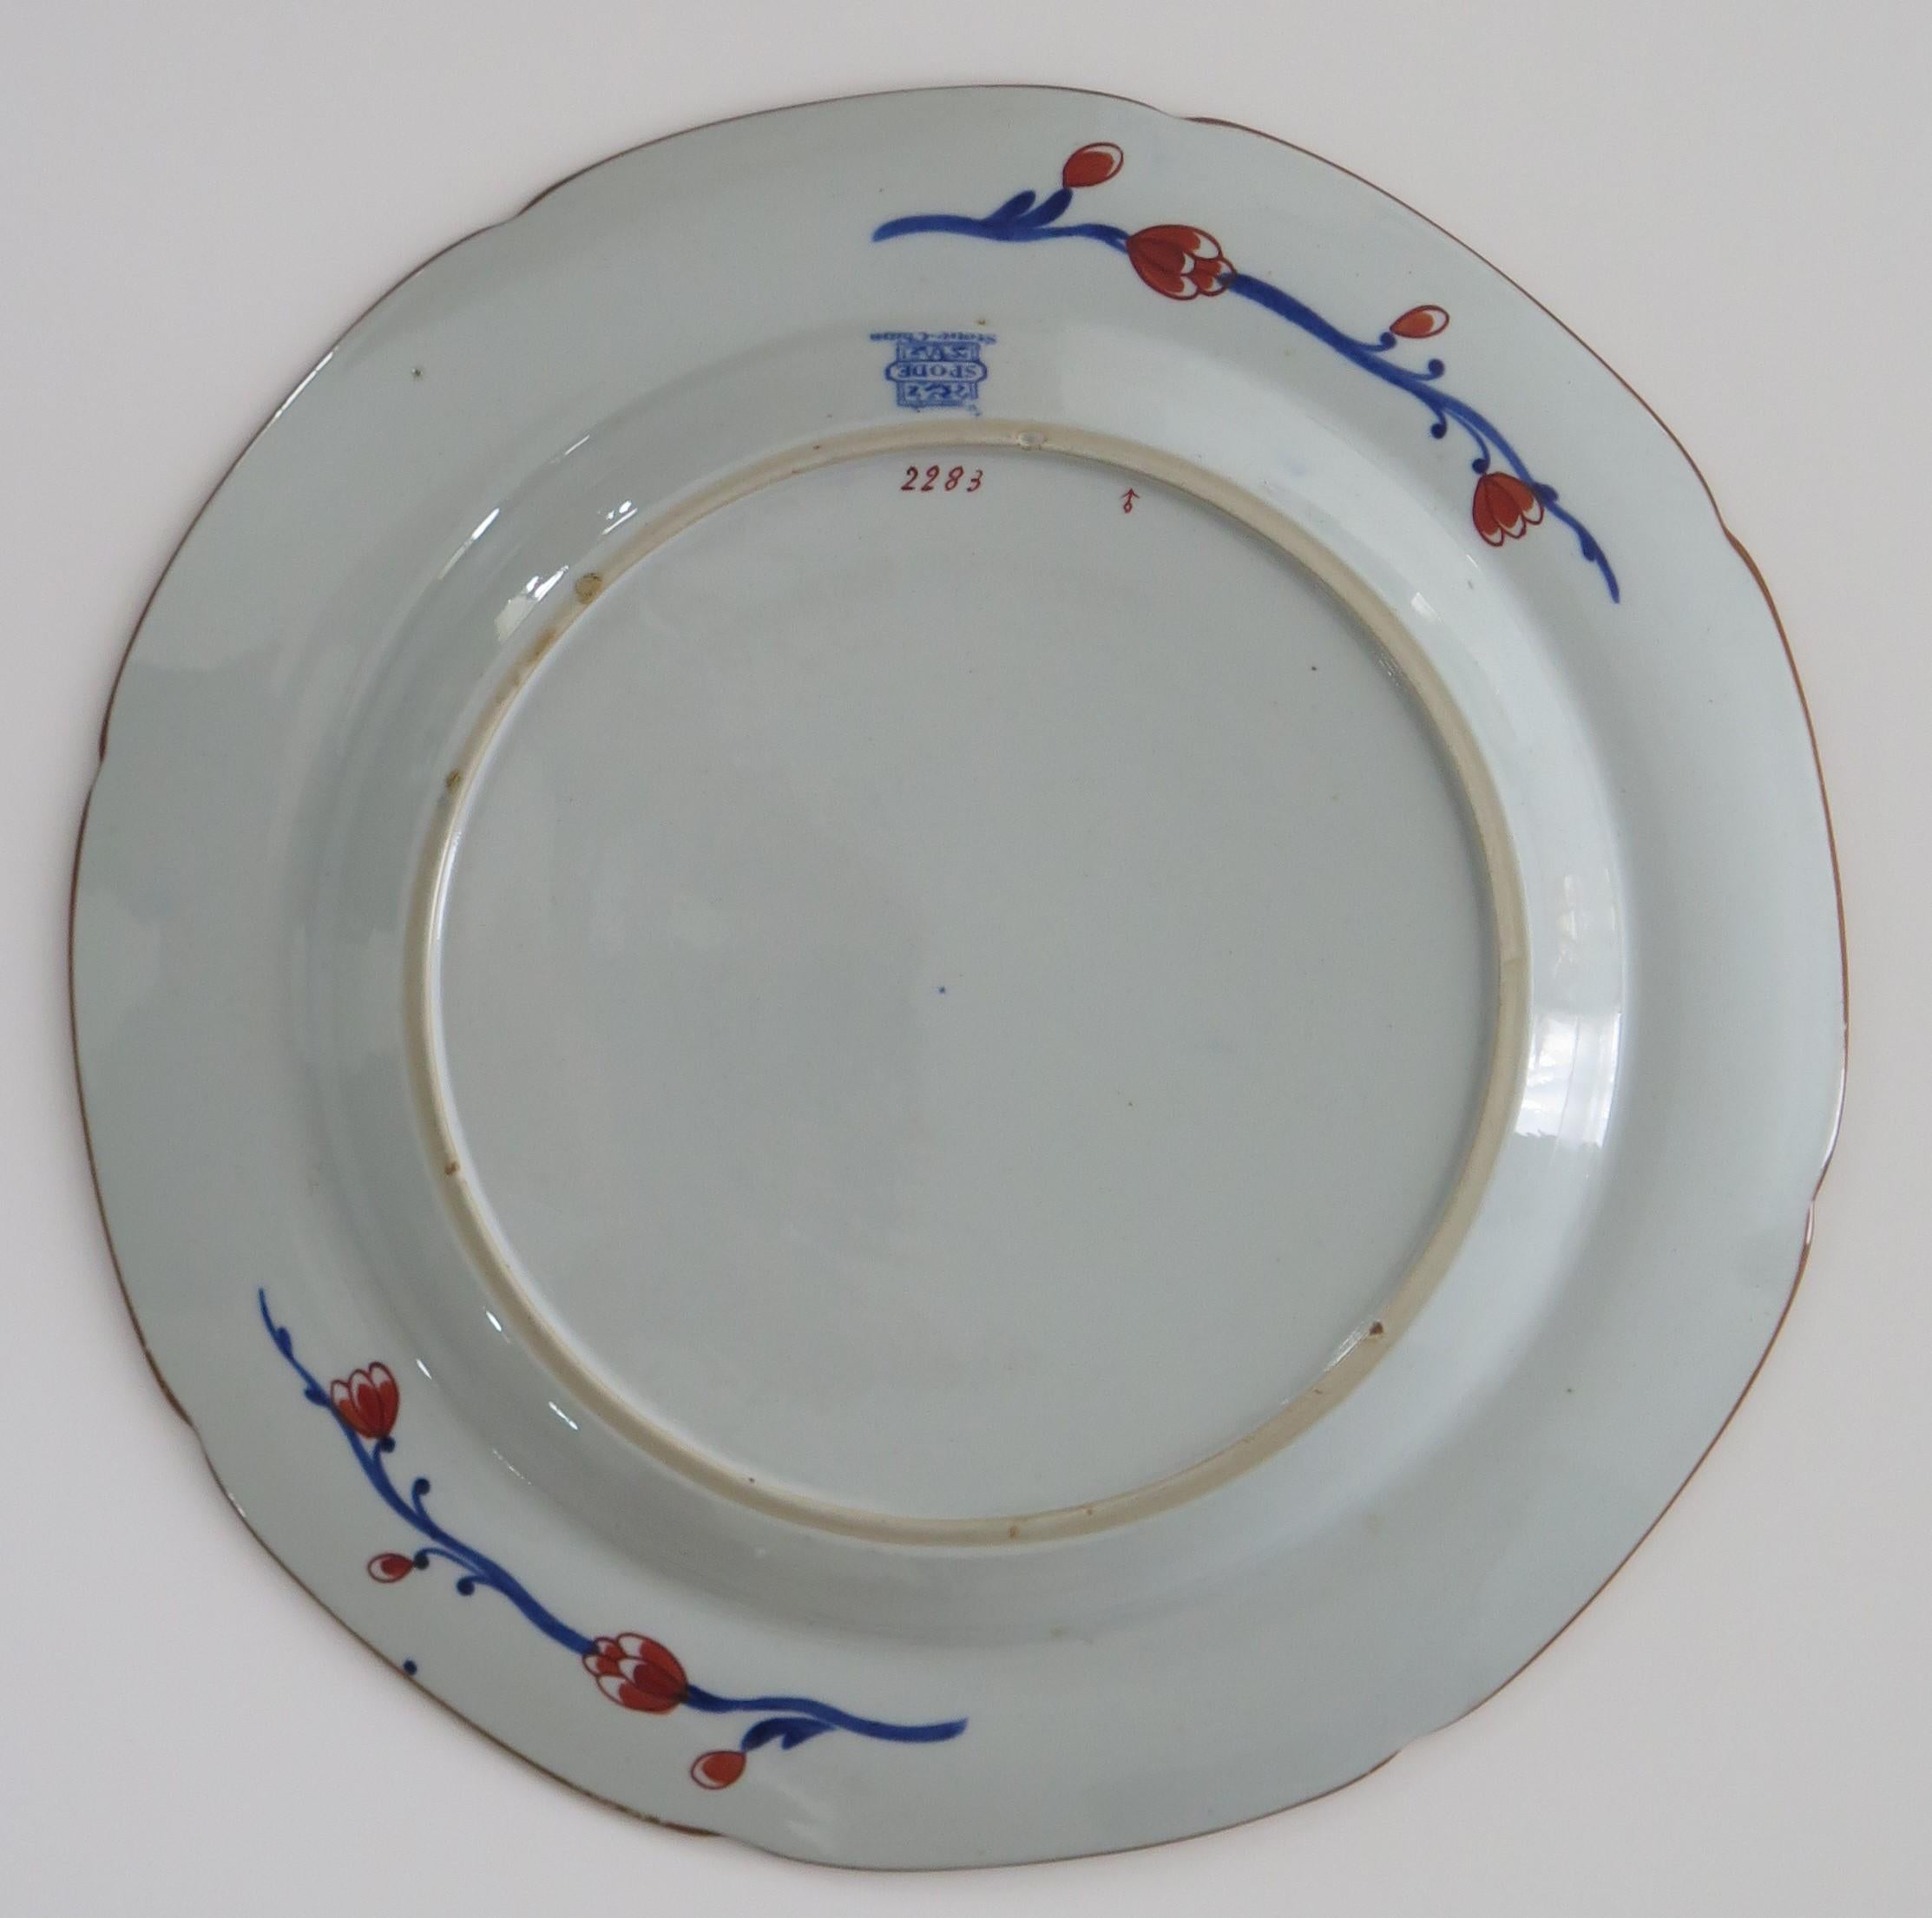 Georgian Spode Dinner Plate a Ironstone Chinoiserie Pattern No.2283, circa 1820 For Sale 2